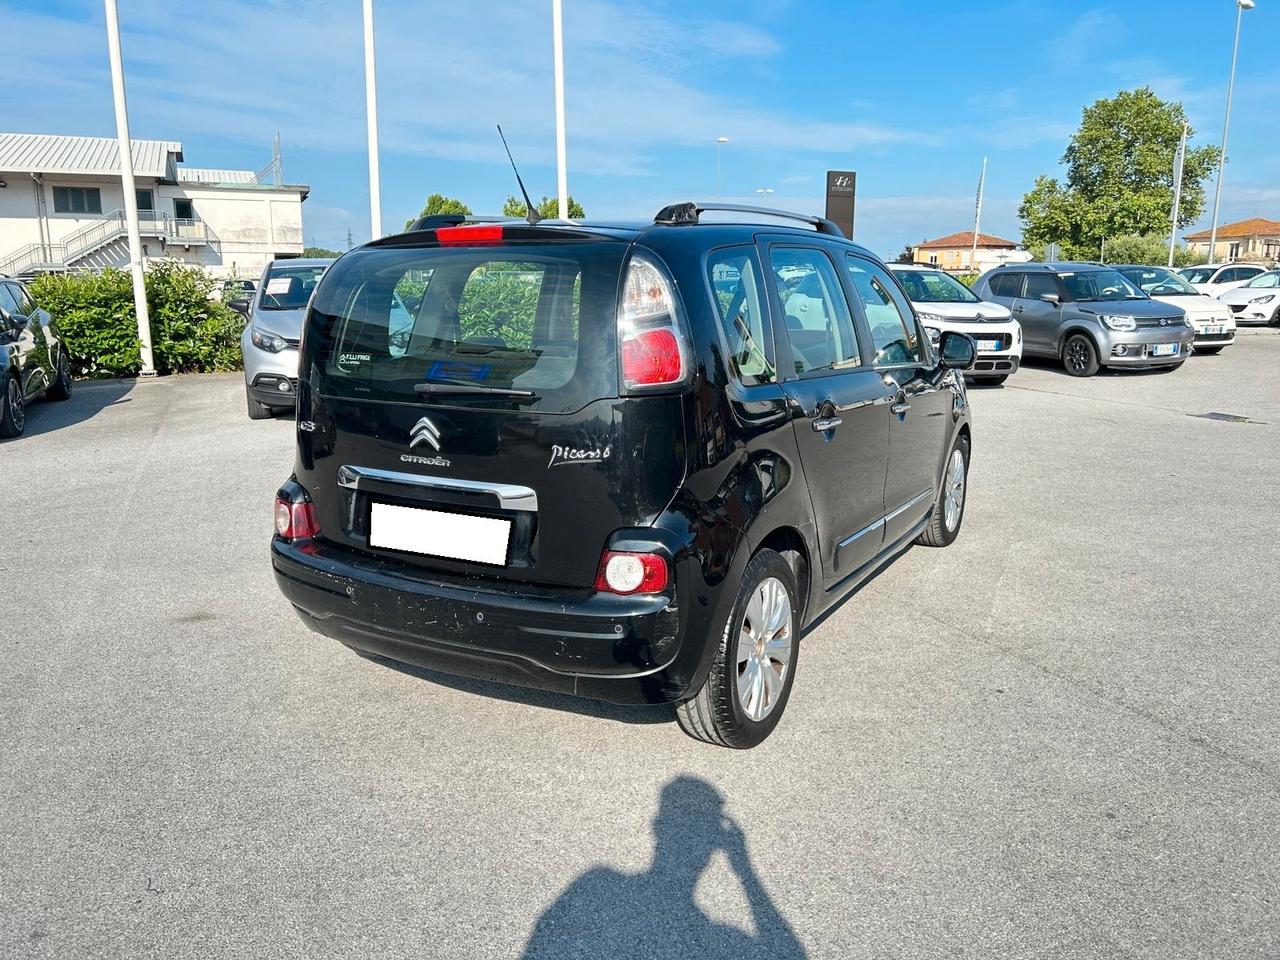 Citroen C3 Picasso C3 Picasso 1.6 HDi 90 Exclusive Limited